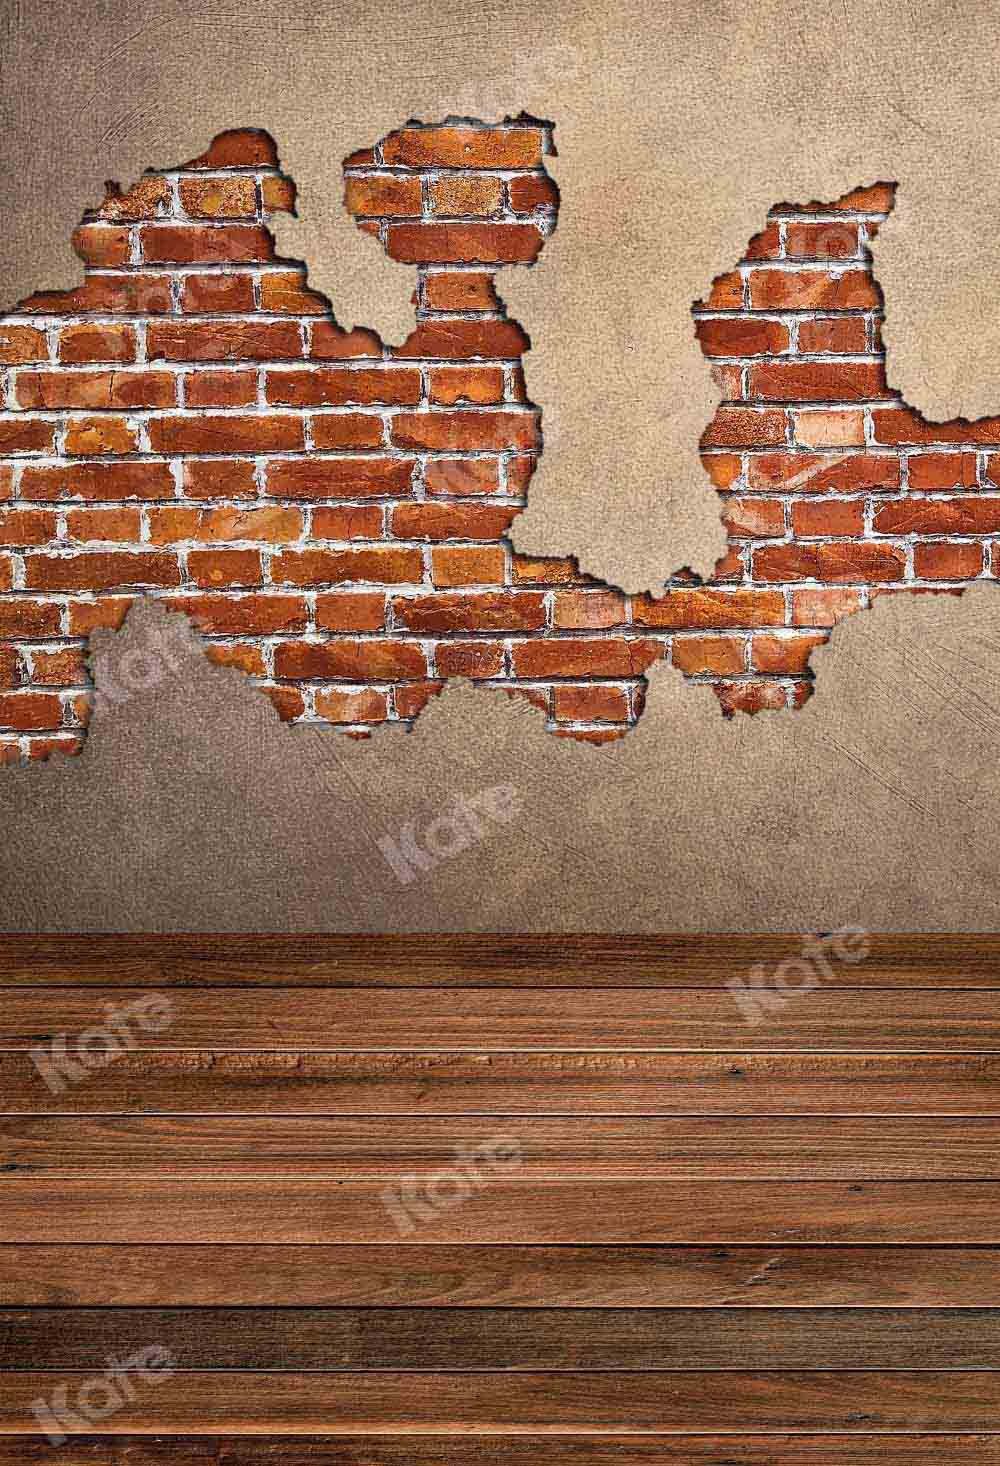 Kate Brick Wall Backdrop Wood Grain Stitching Designed by Chain Photography